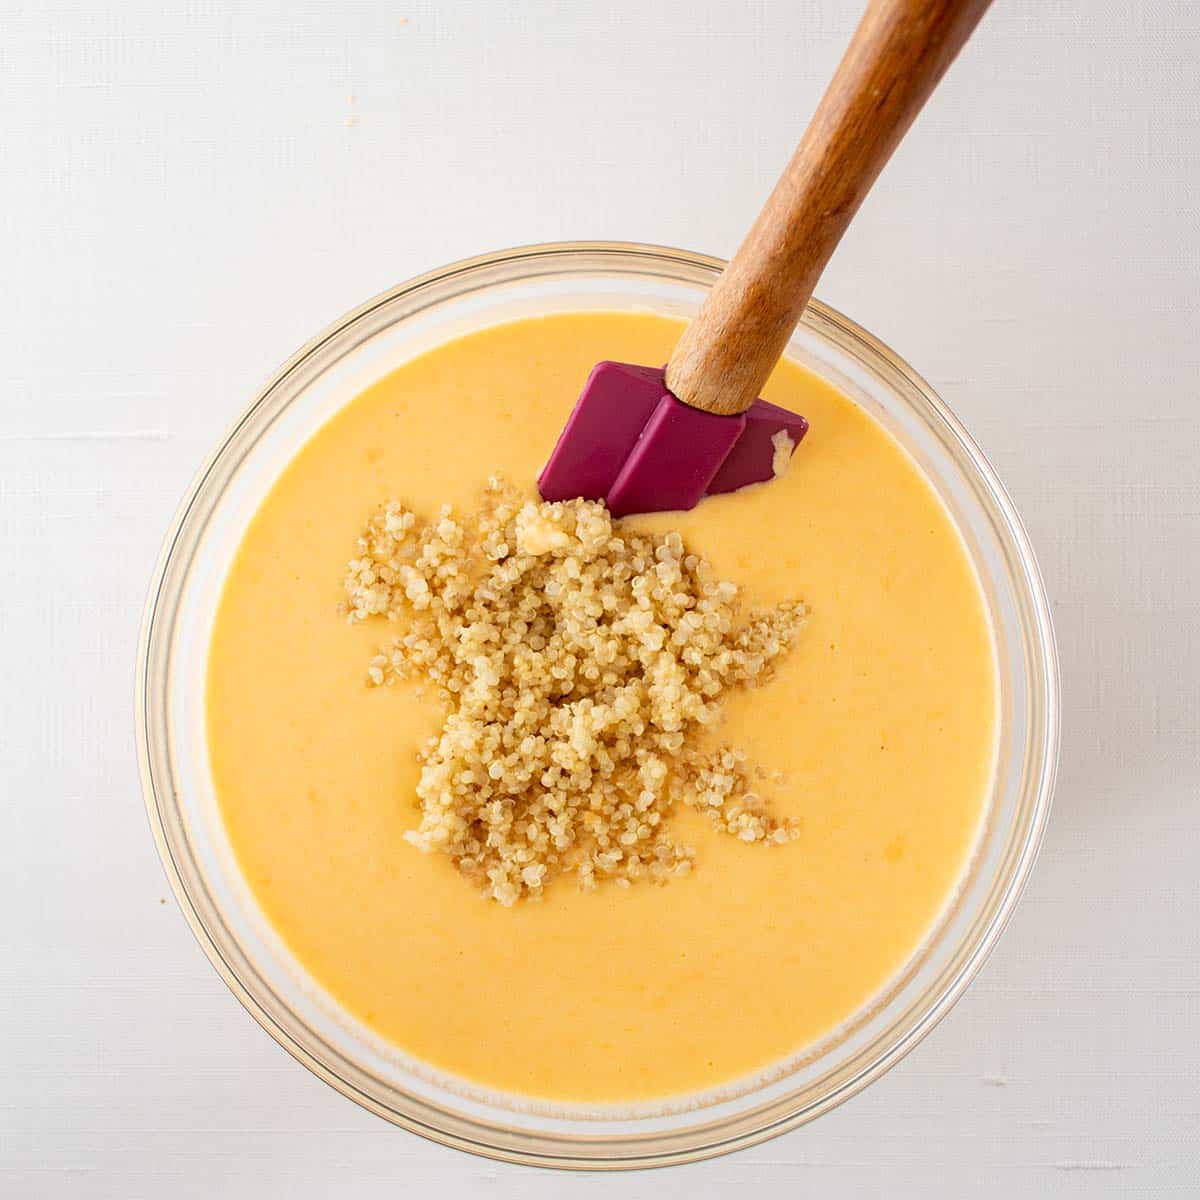 cheese sauce poured into bowl of cooked quinoa.